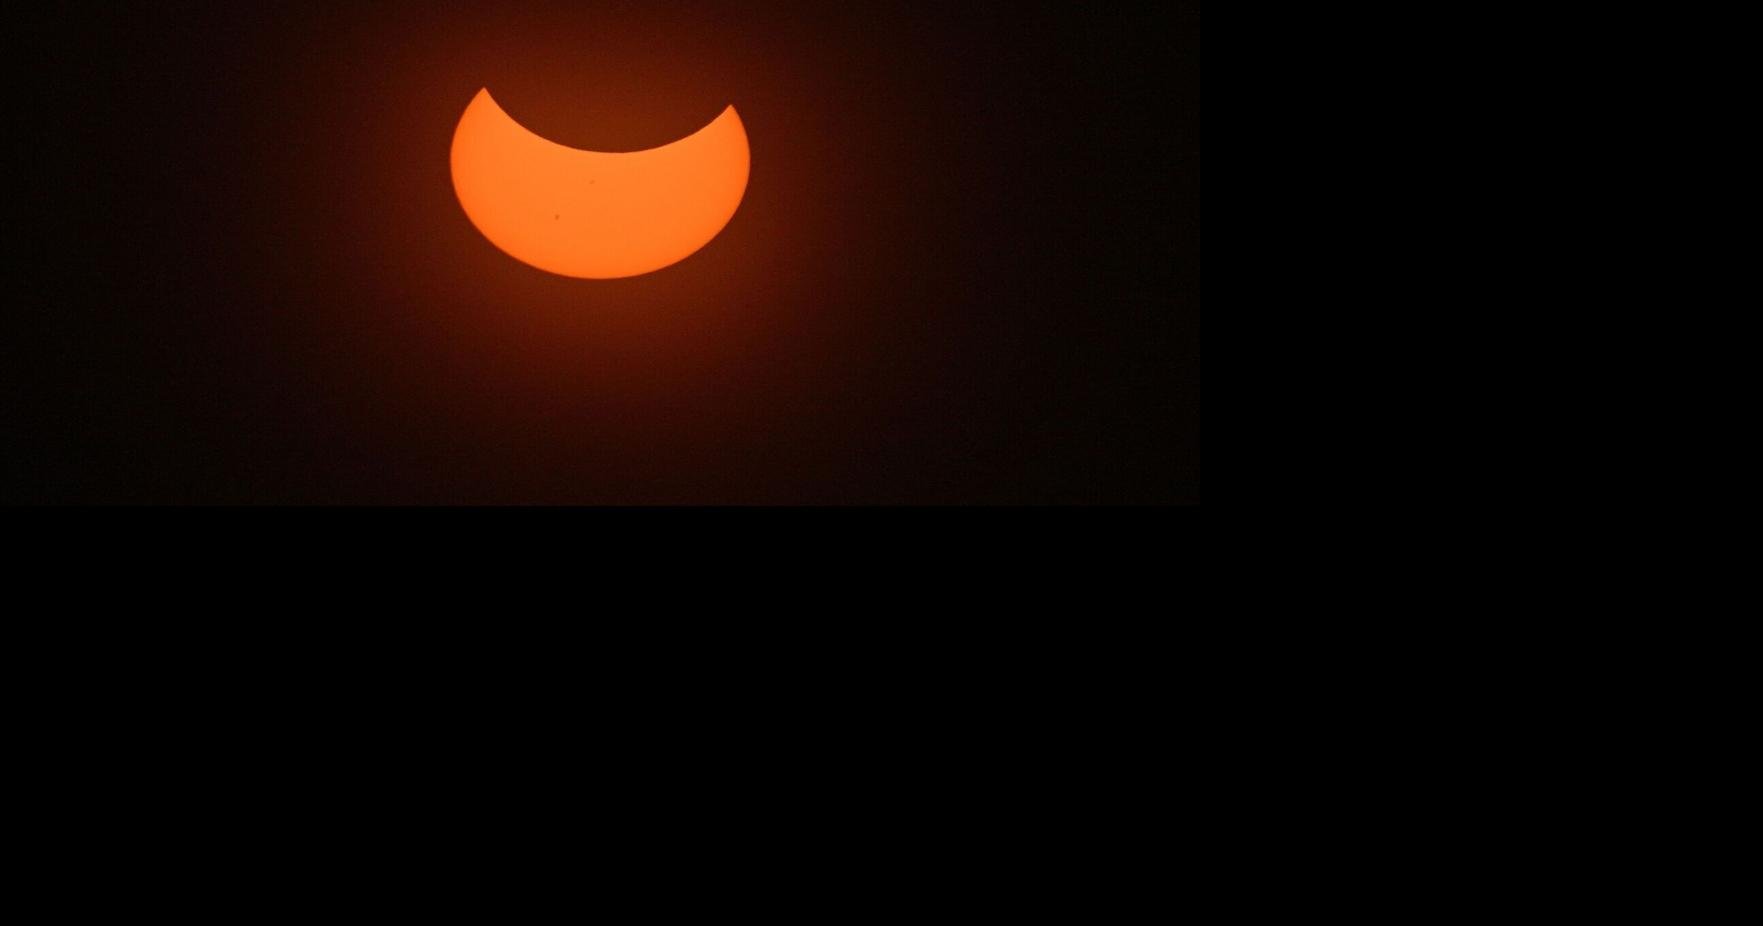 Indiana DNR offering solar eclipse glasses and Tshirts